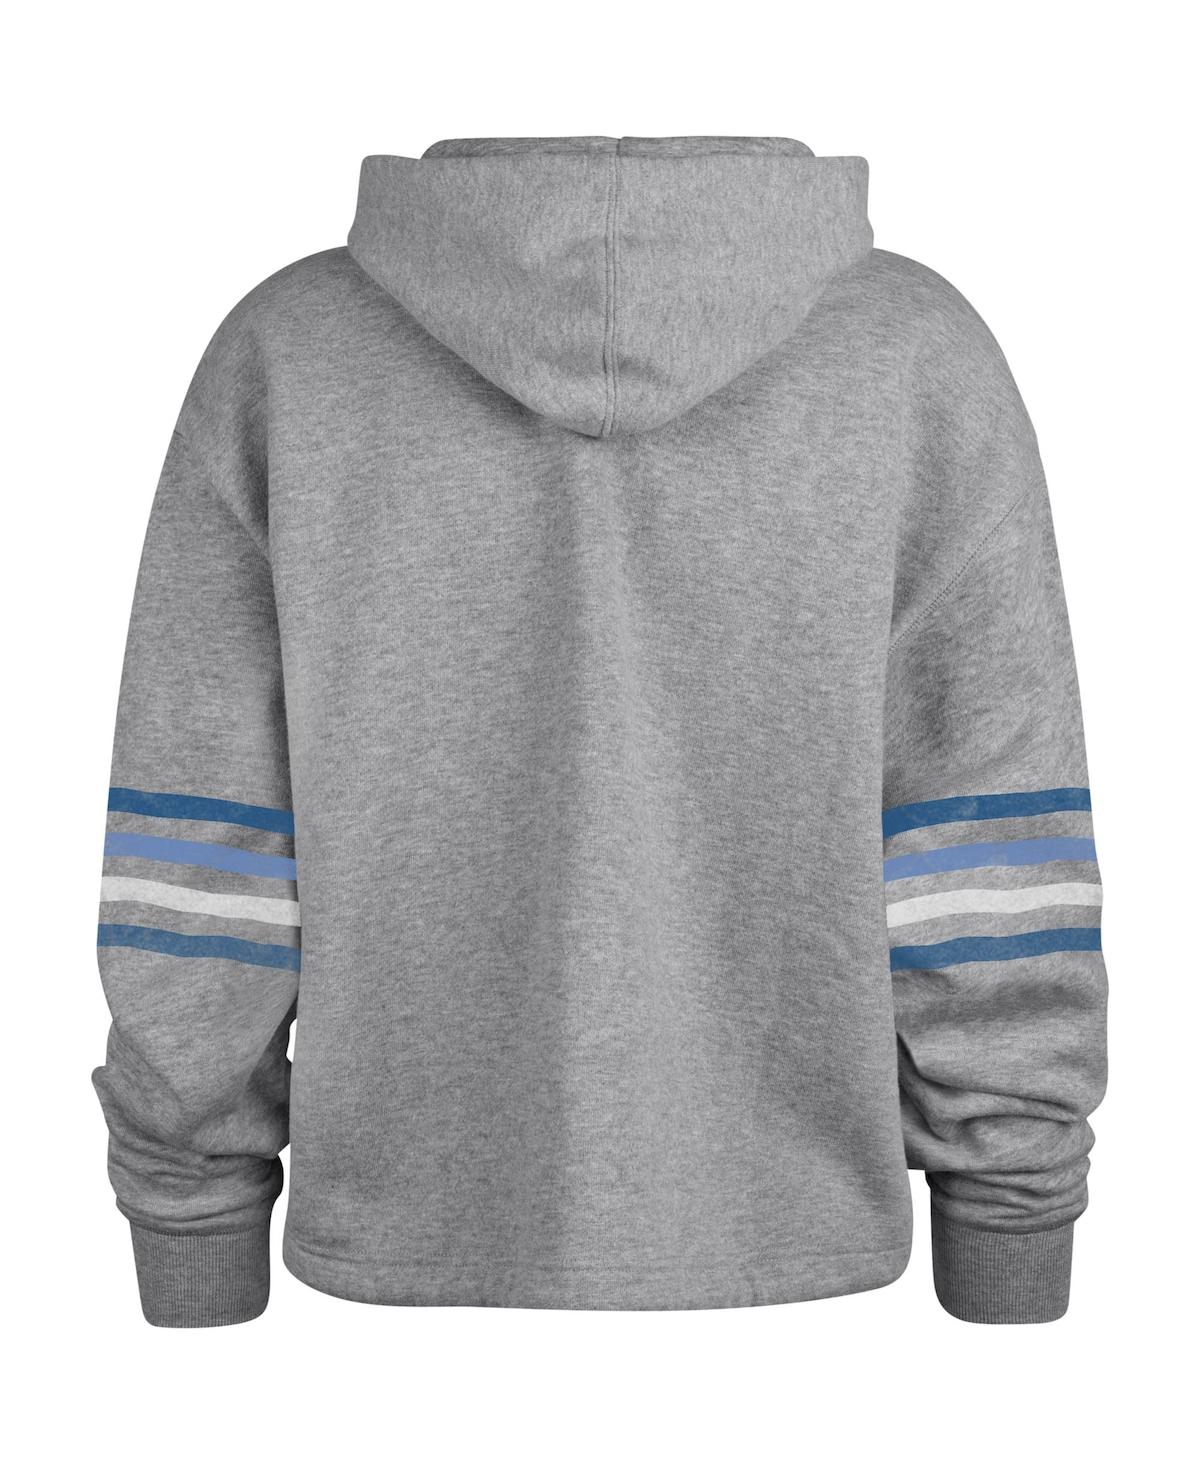 Shop 47 Brand Women's ' Heather Gray Distressed Indianapolis Colts Upland Bennett Pullover Hoodie